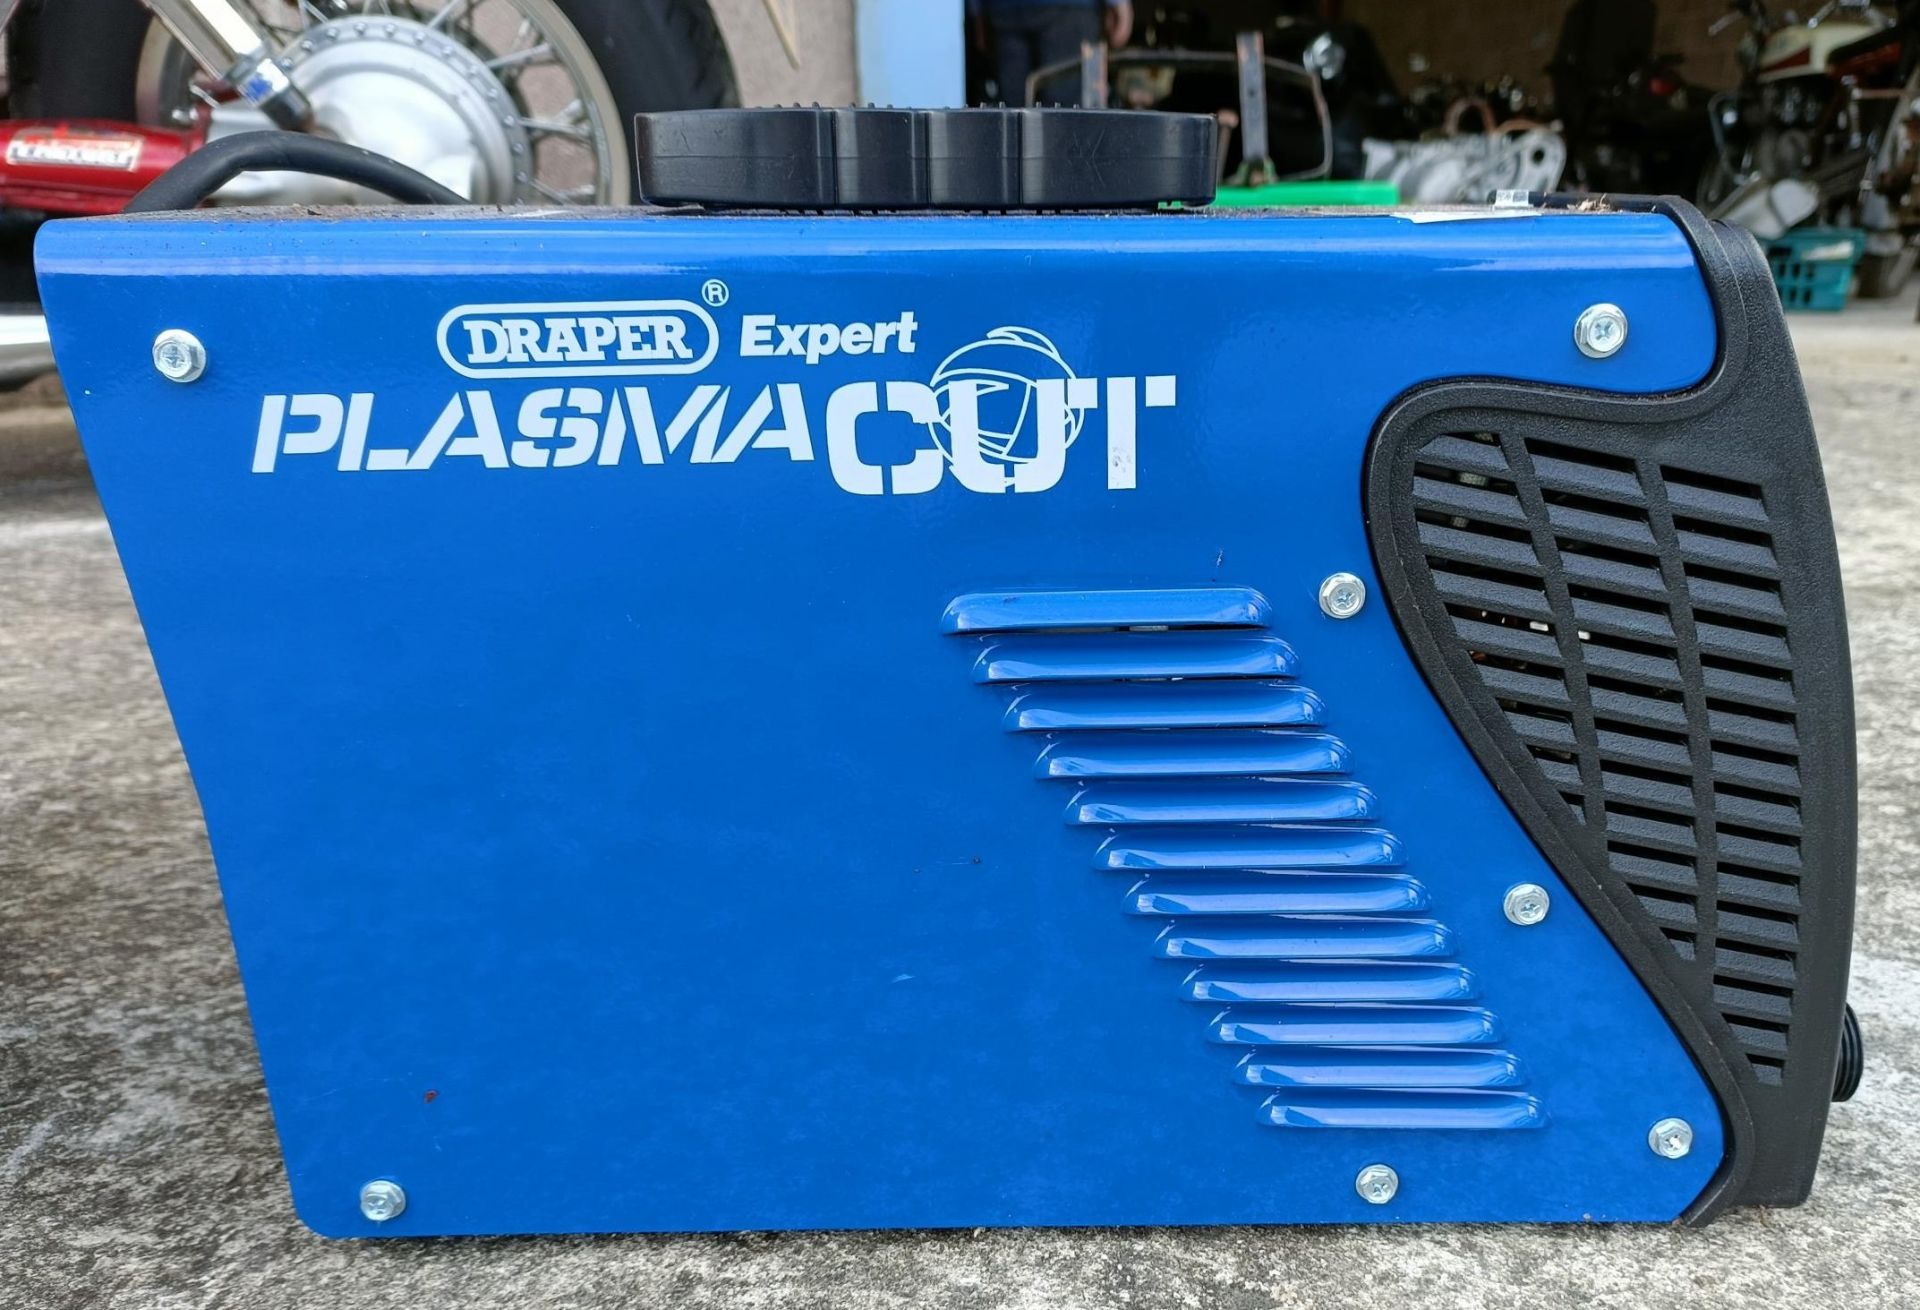 Draper Plasma cutter and accessories Being sold without reserve From a Southampton deceased estate